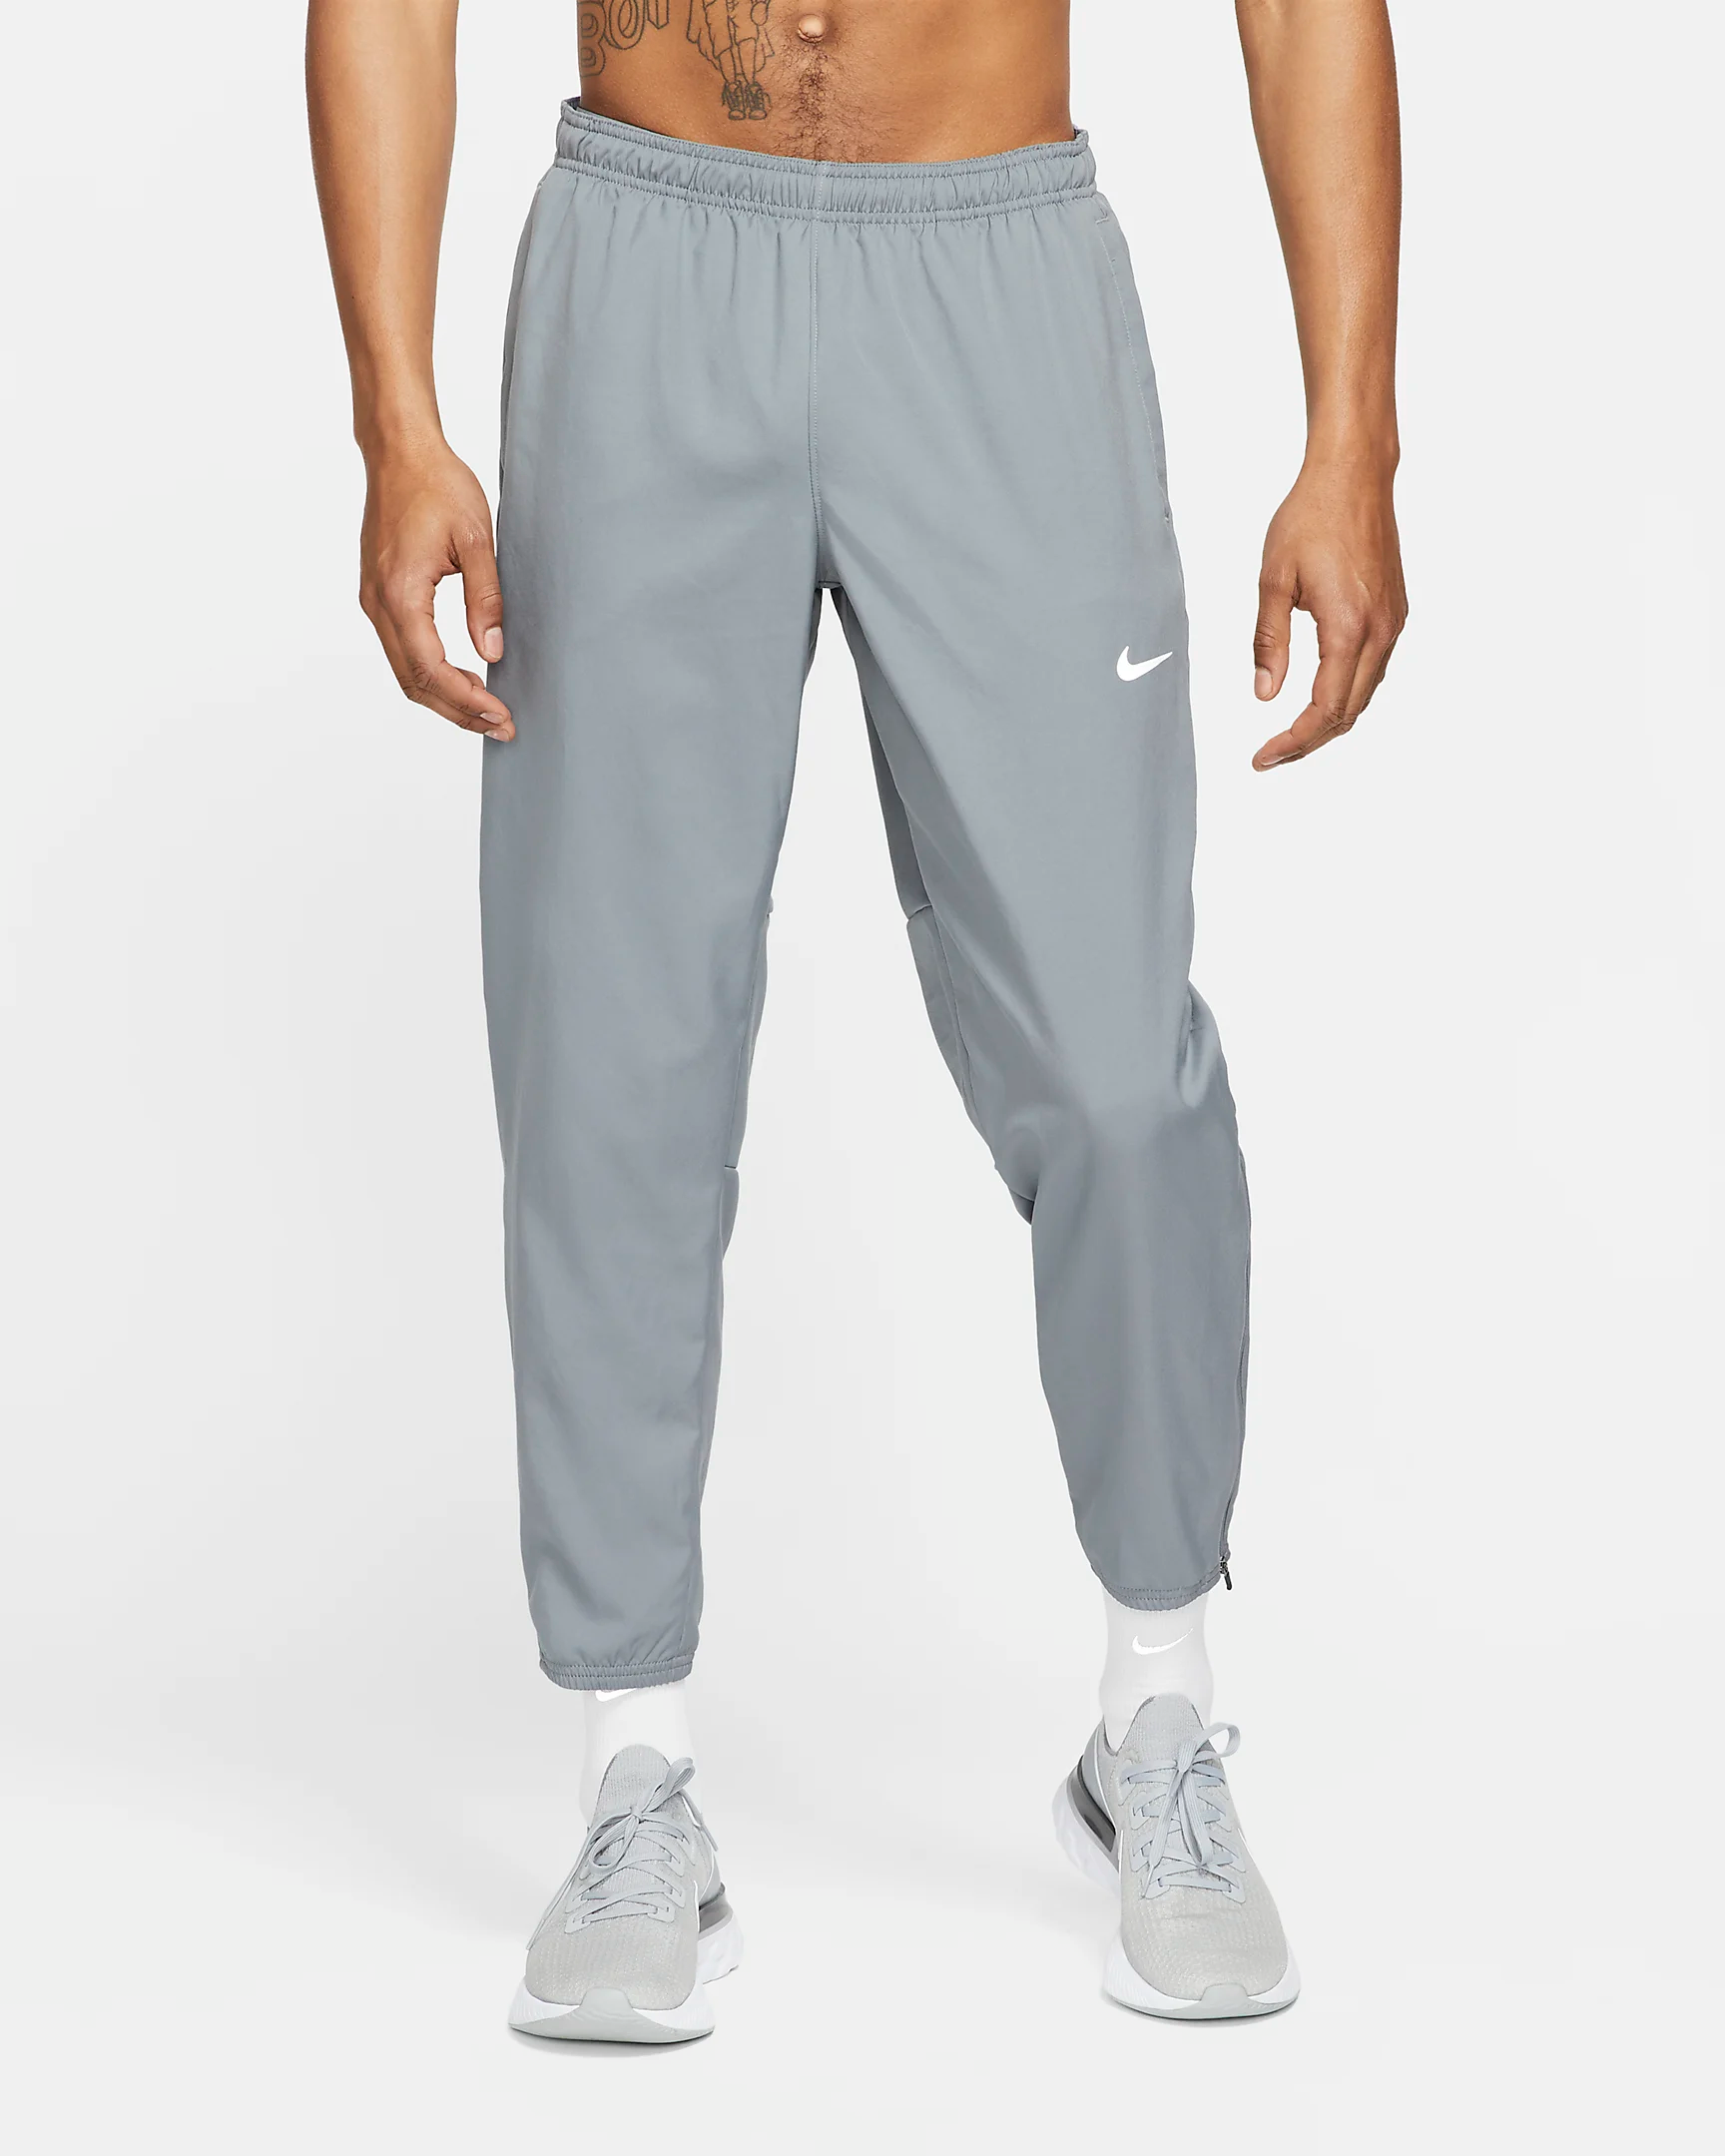 Over 40% OFF the Nike Dri-Fit Challenger Woven Pants — Sneaker Shouts